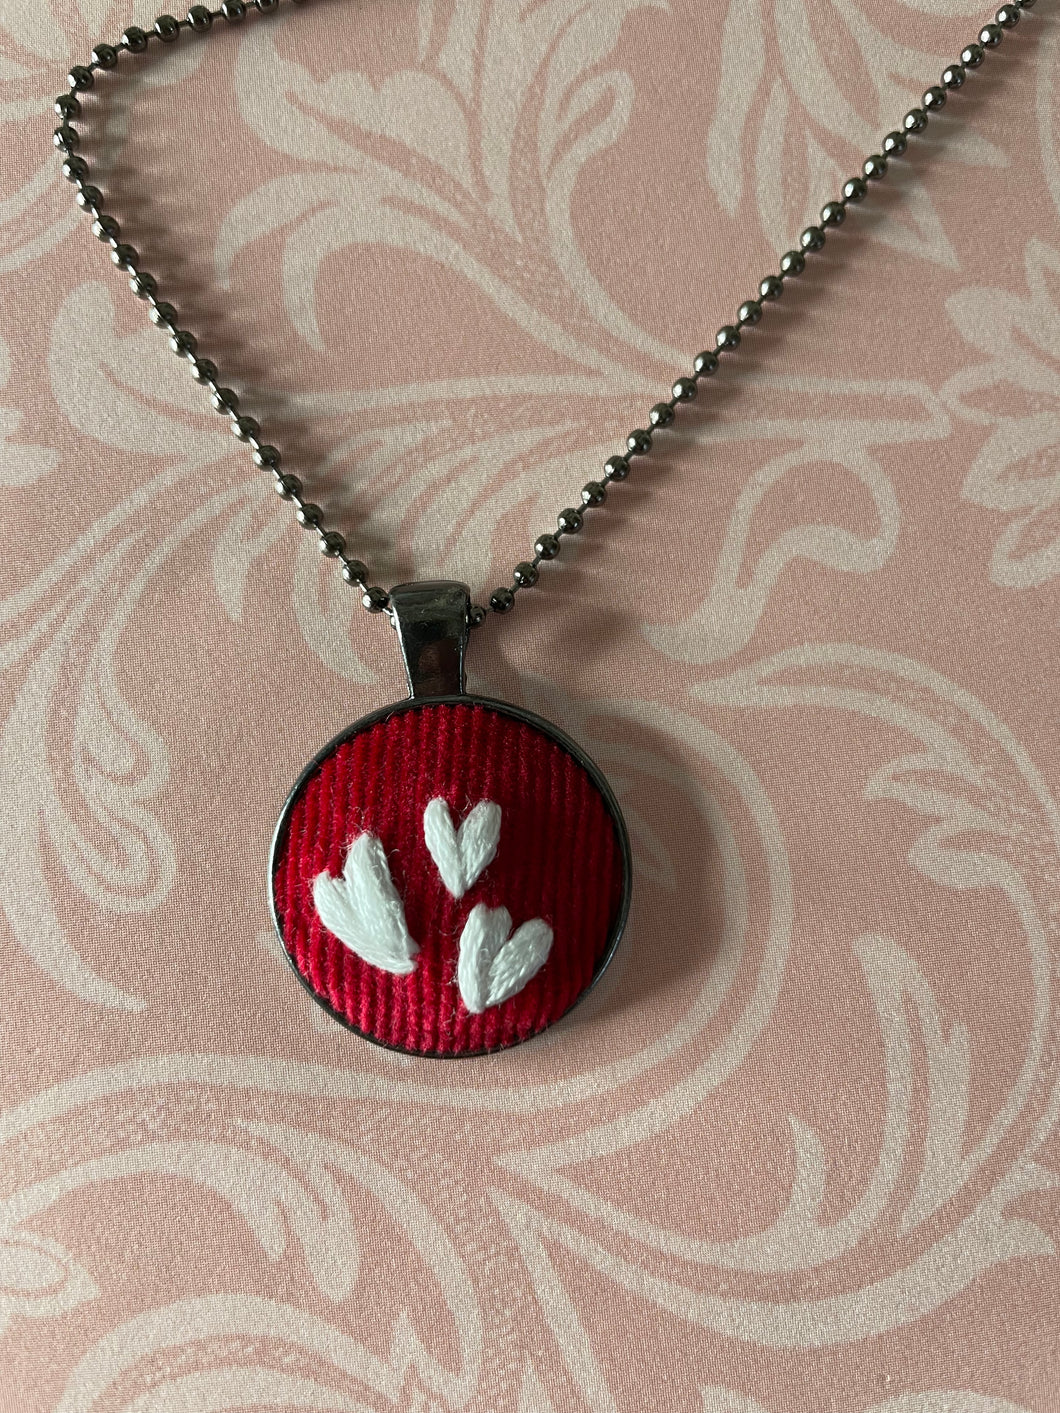 Hand Embroidered White Heart on Red Corduroy Necklace